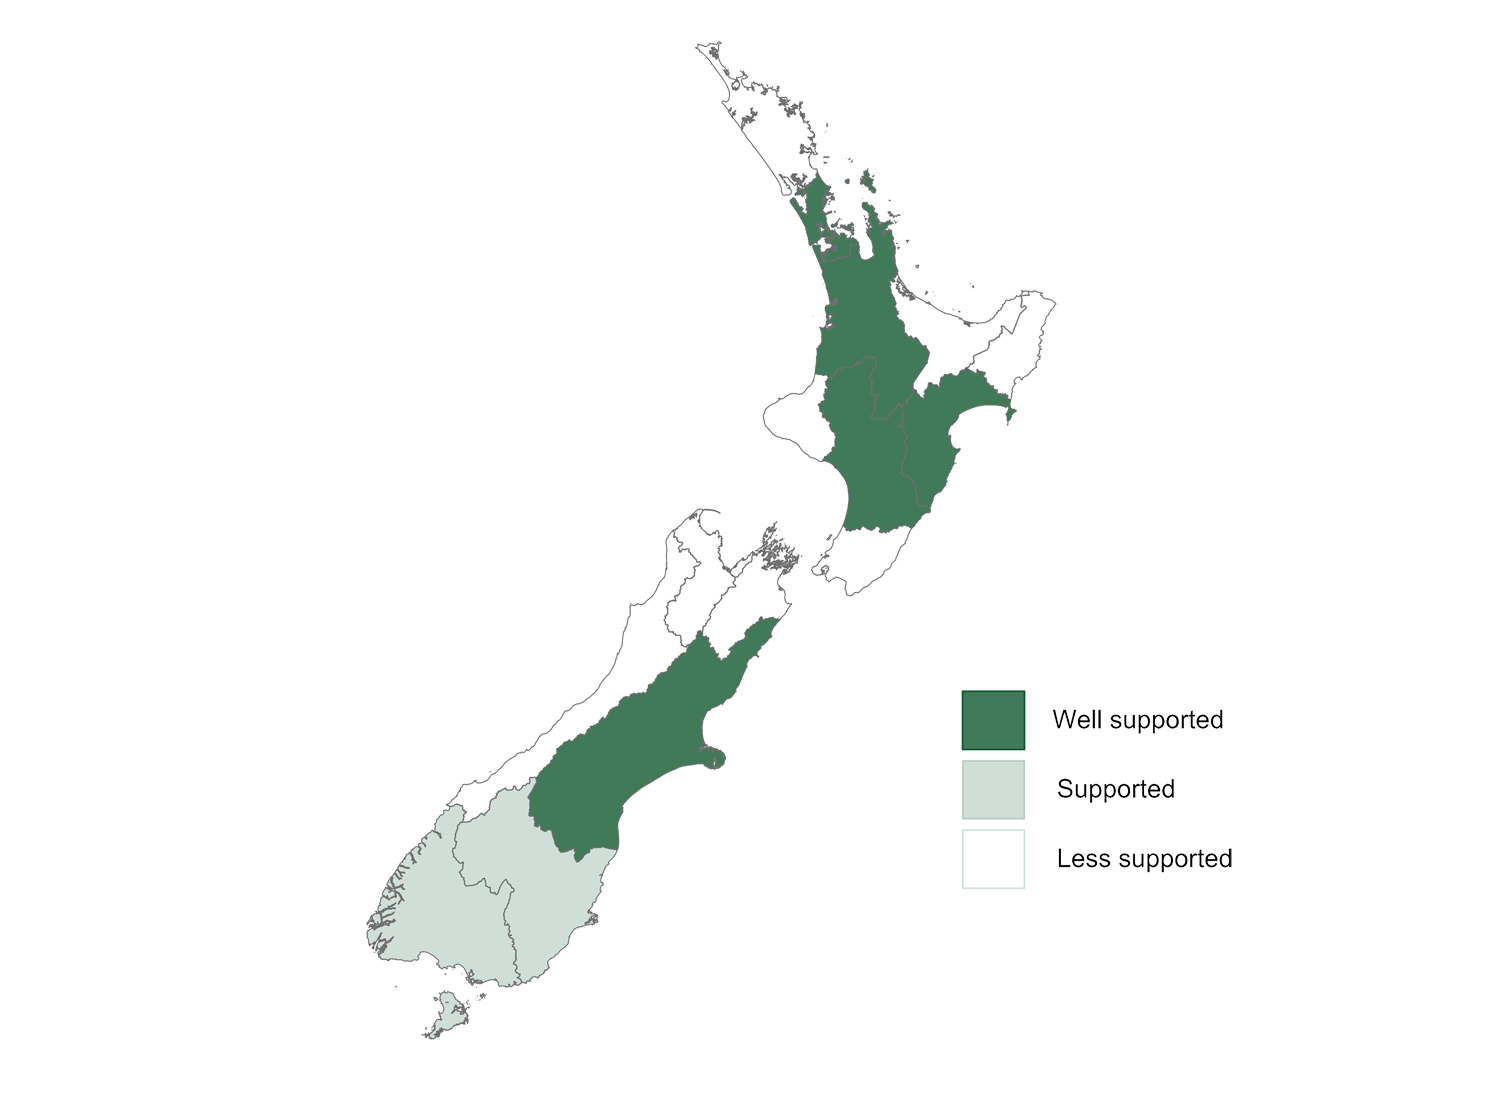 New Zealand map highlighting the best regions for commercial potato growing.